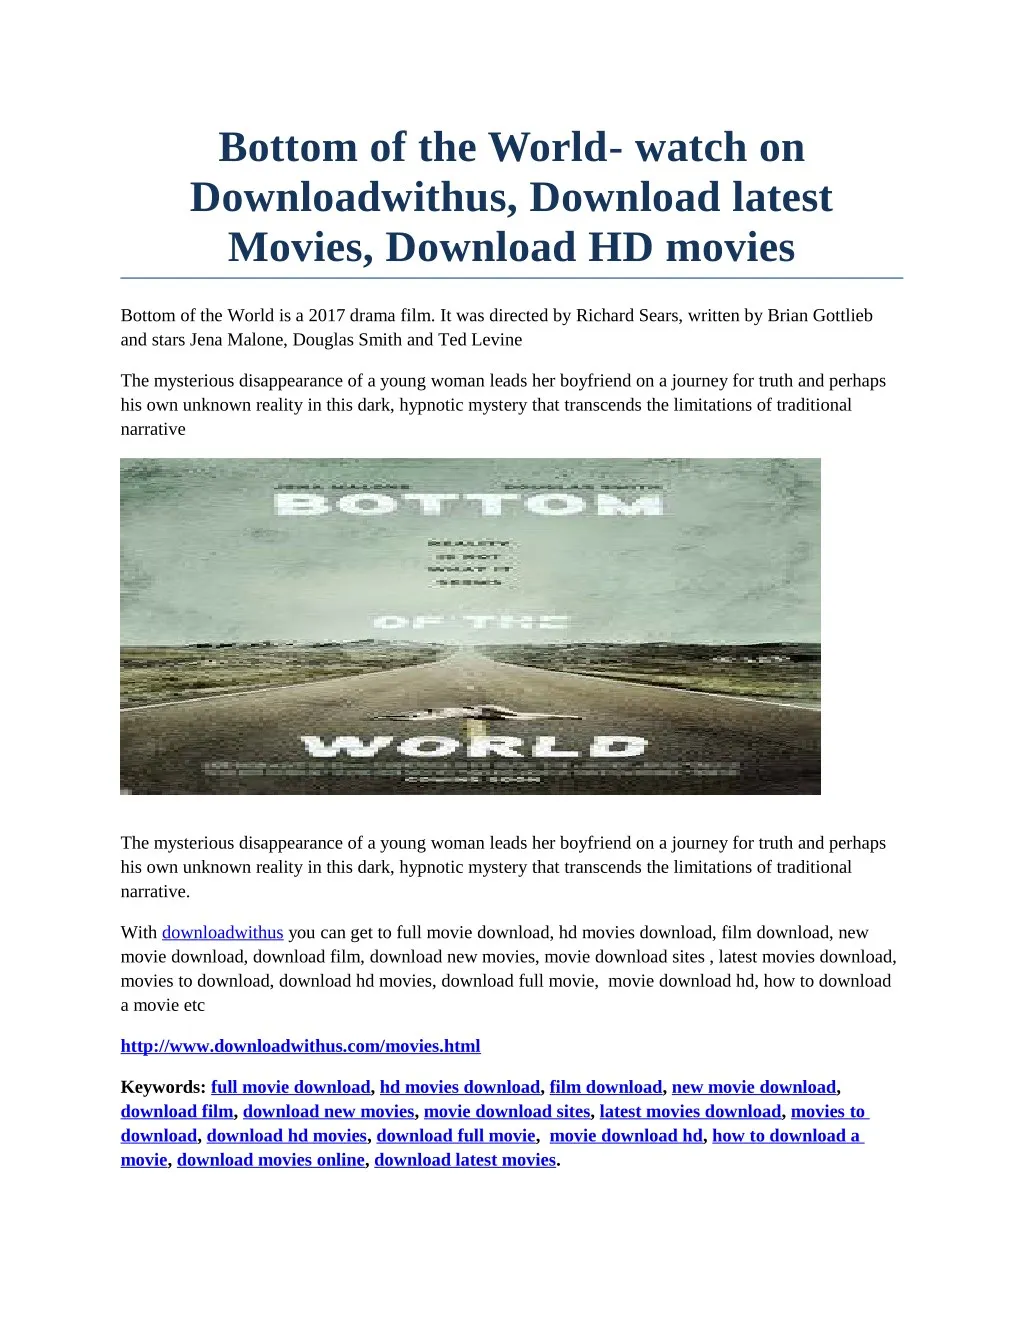 bottom of the world watch on downloadwithus